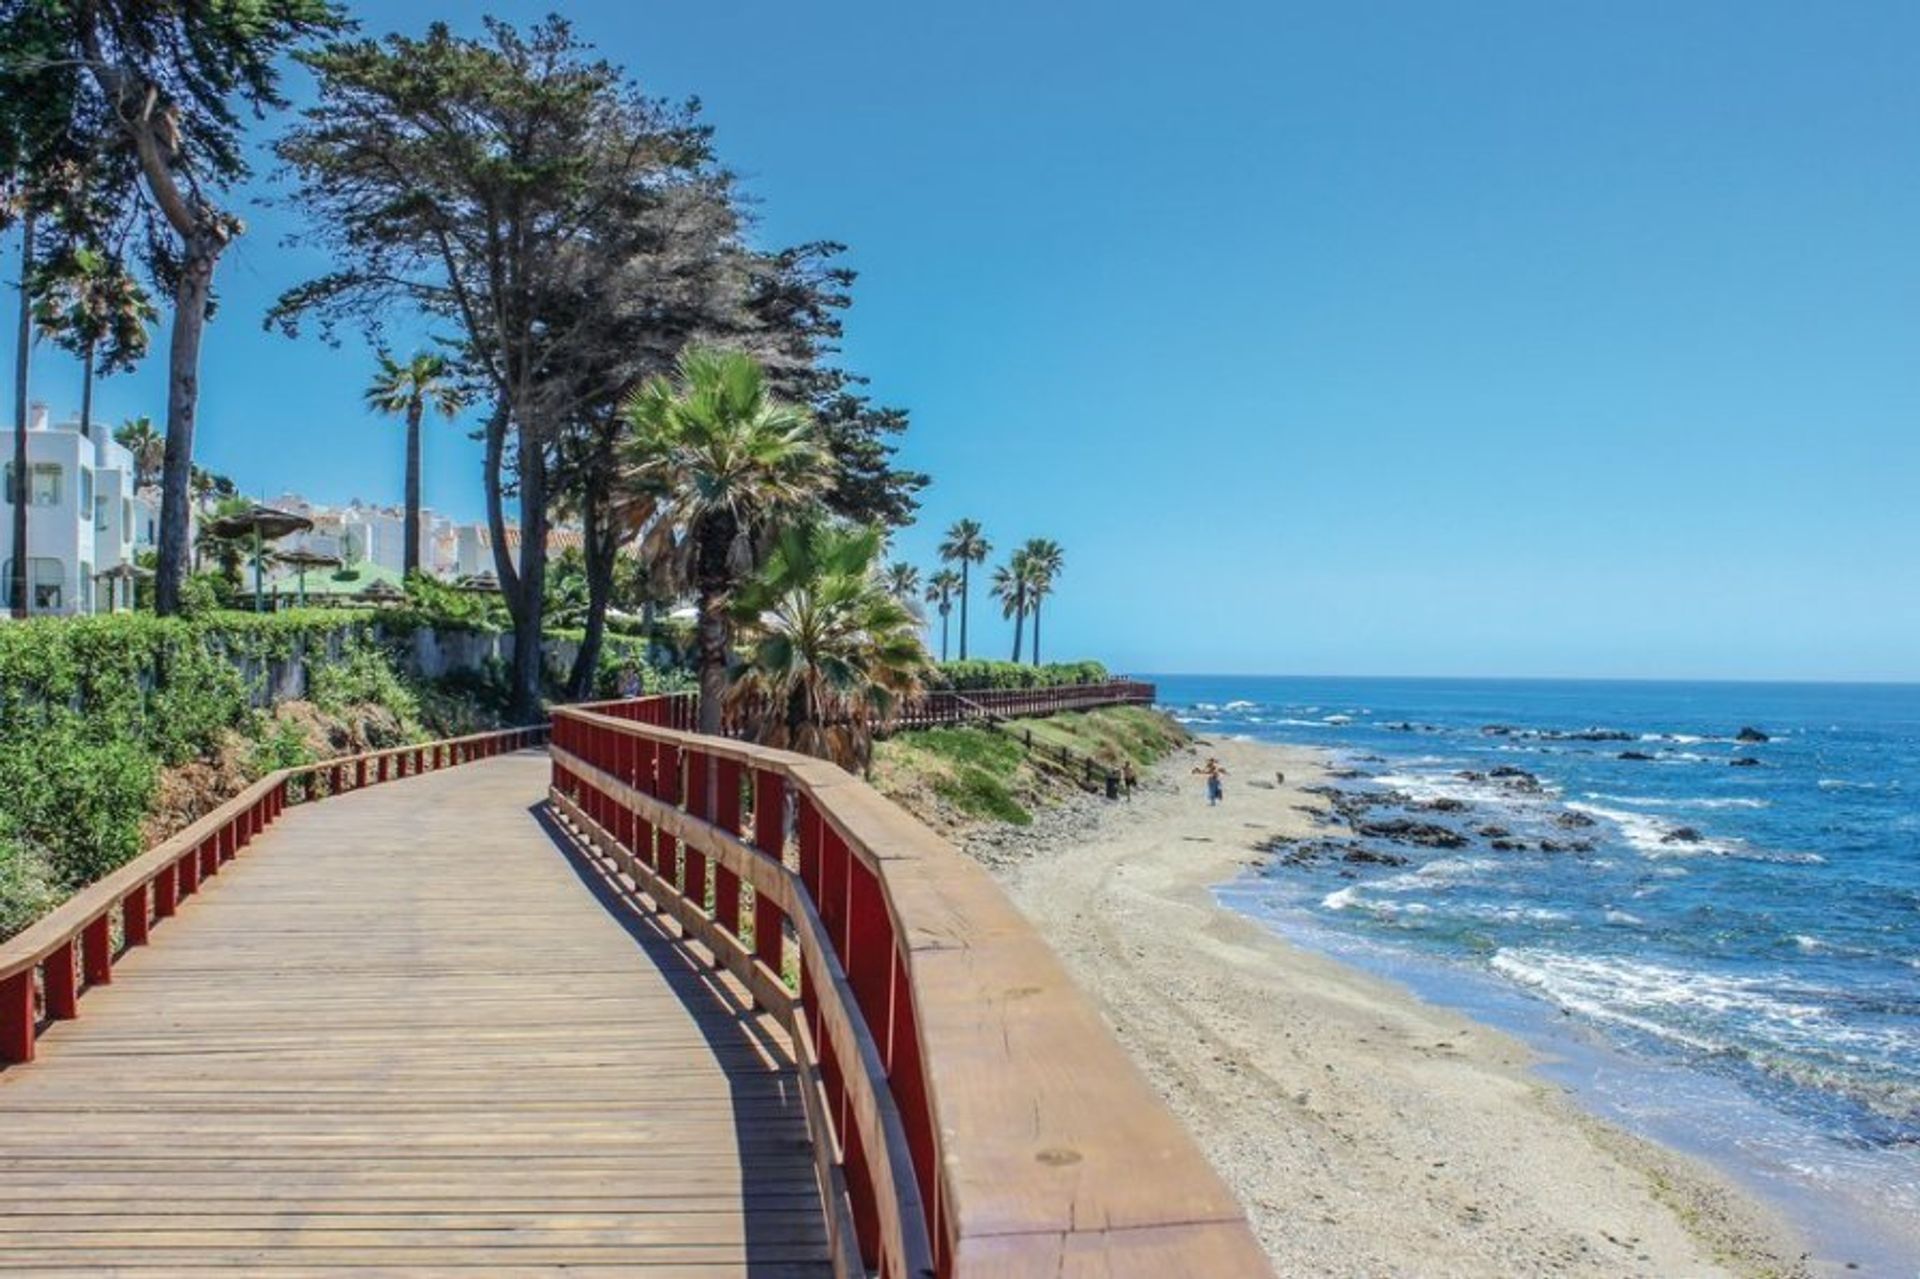 Take a relaxing stroll down the beach promenade with a backdrop of the sparkling Mediterranean 